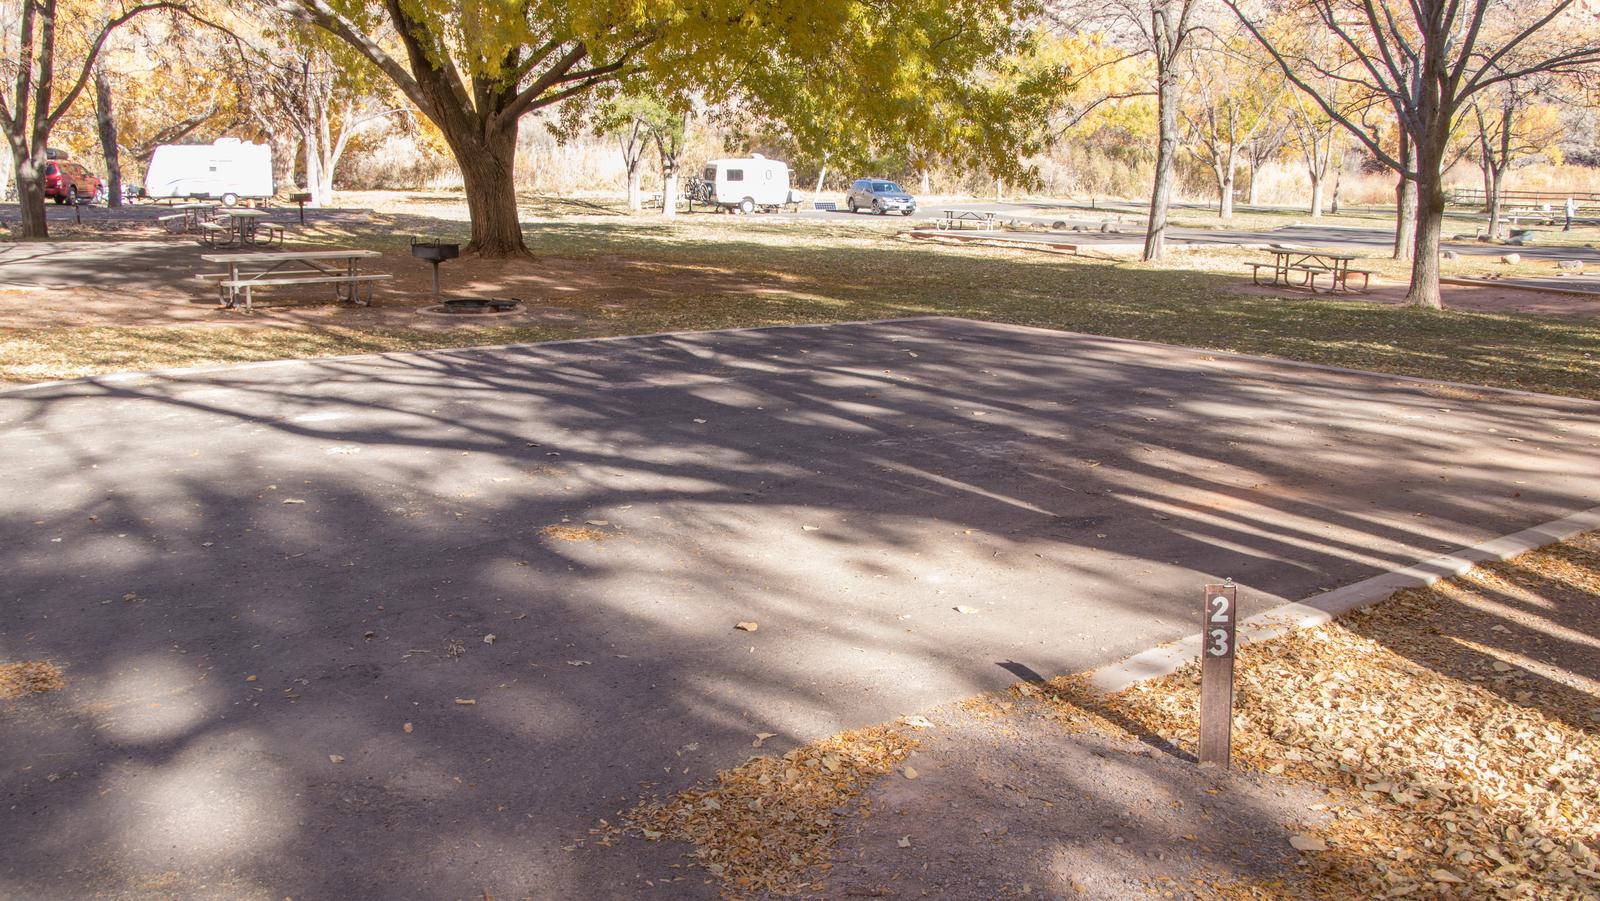 A paved driveway. Facing the end of the driveway, a picnic table, grill, and fire pit are to the left side. 1 tree is near the picnic table. A few other trees are in the background.Located in Loop B in fall.
Paved dimensions: 32' x 32'